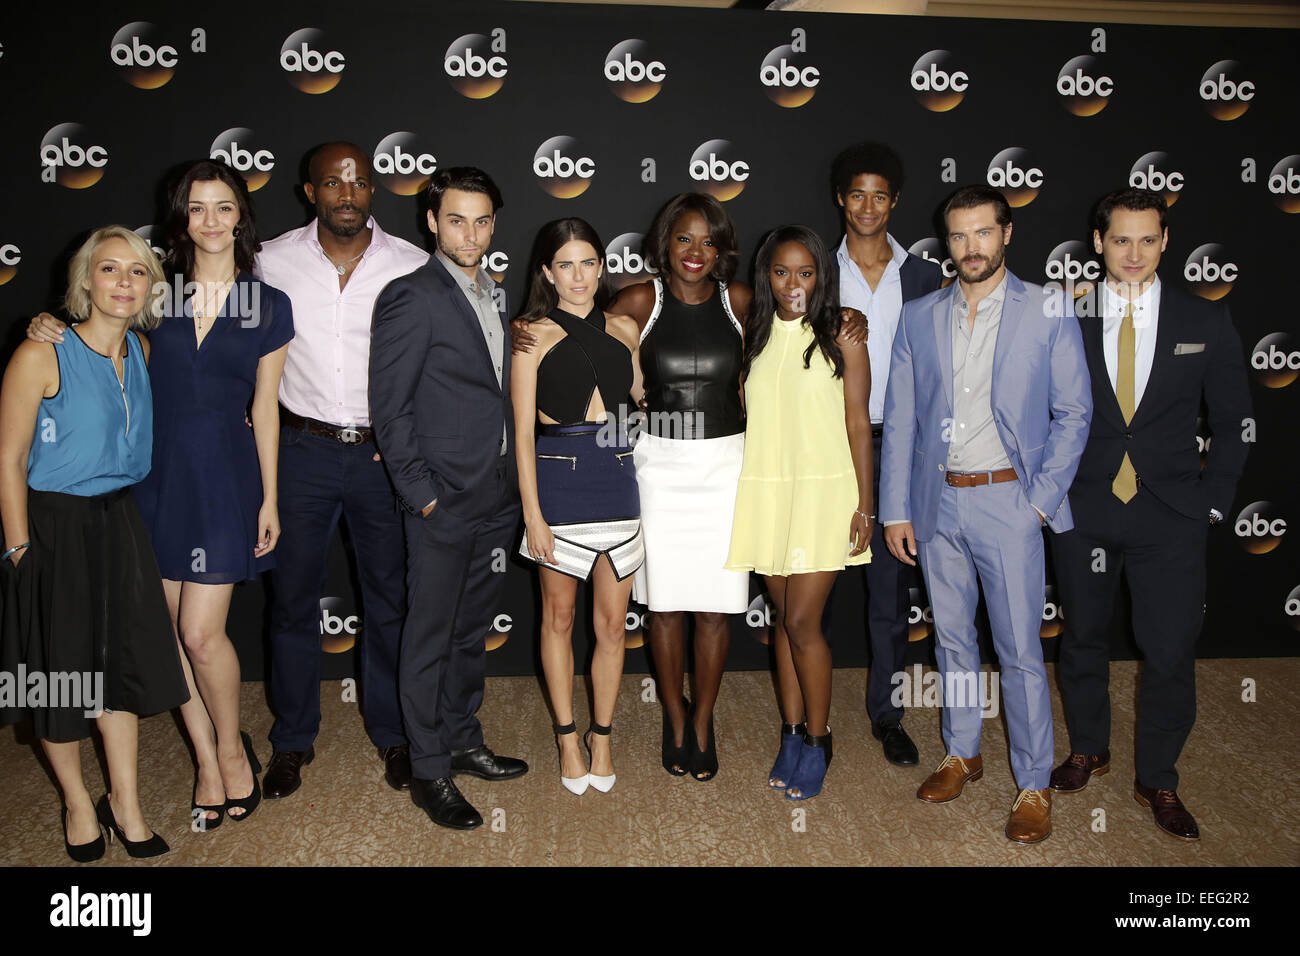 Celebrities attend Disney | ABC TCA 2014 Summer Press Tour at The Beverly Hilton hotel - Arrivals  Featuring: Betsy Beers,Katie Findlay,Billy Brown,Jack Falahee,Karla Souza,Viola Davis,Aja Naomi King,Alfred Enoch,Charlie Weber,Matt McGorry Where: Beverly Stock Photo